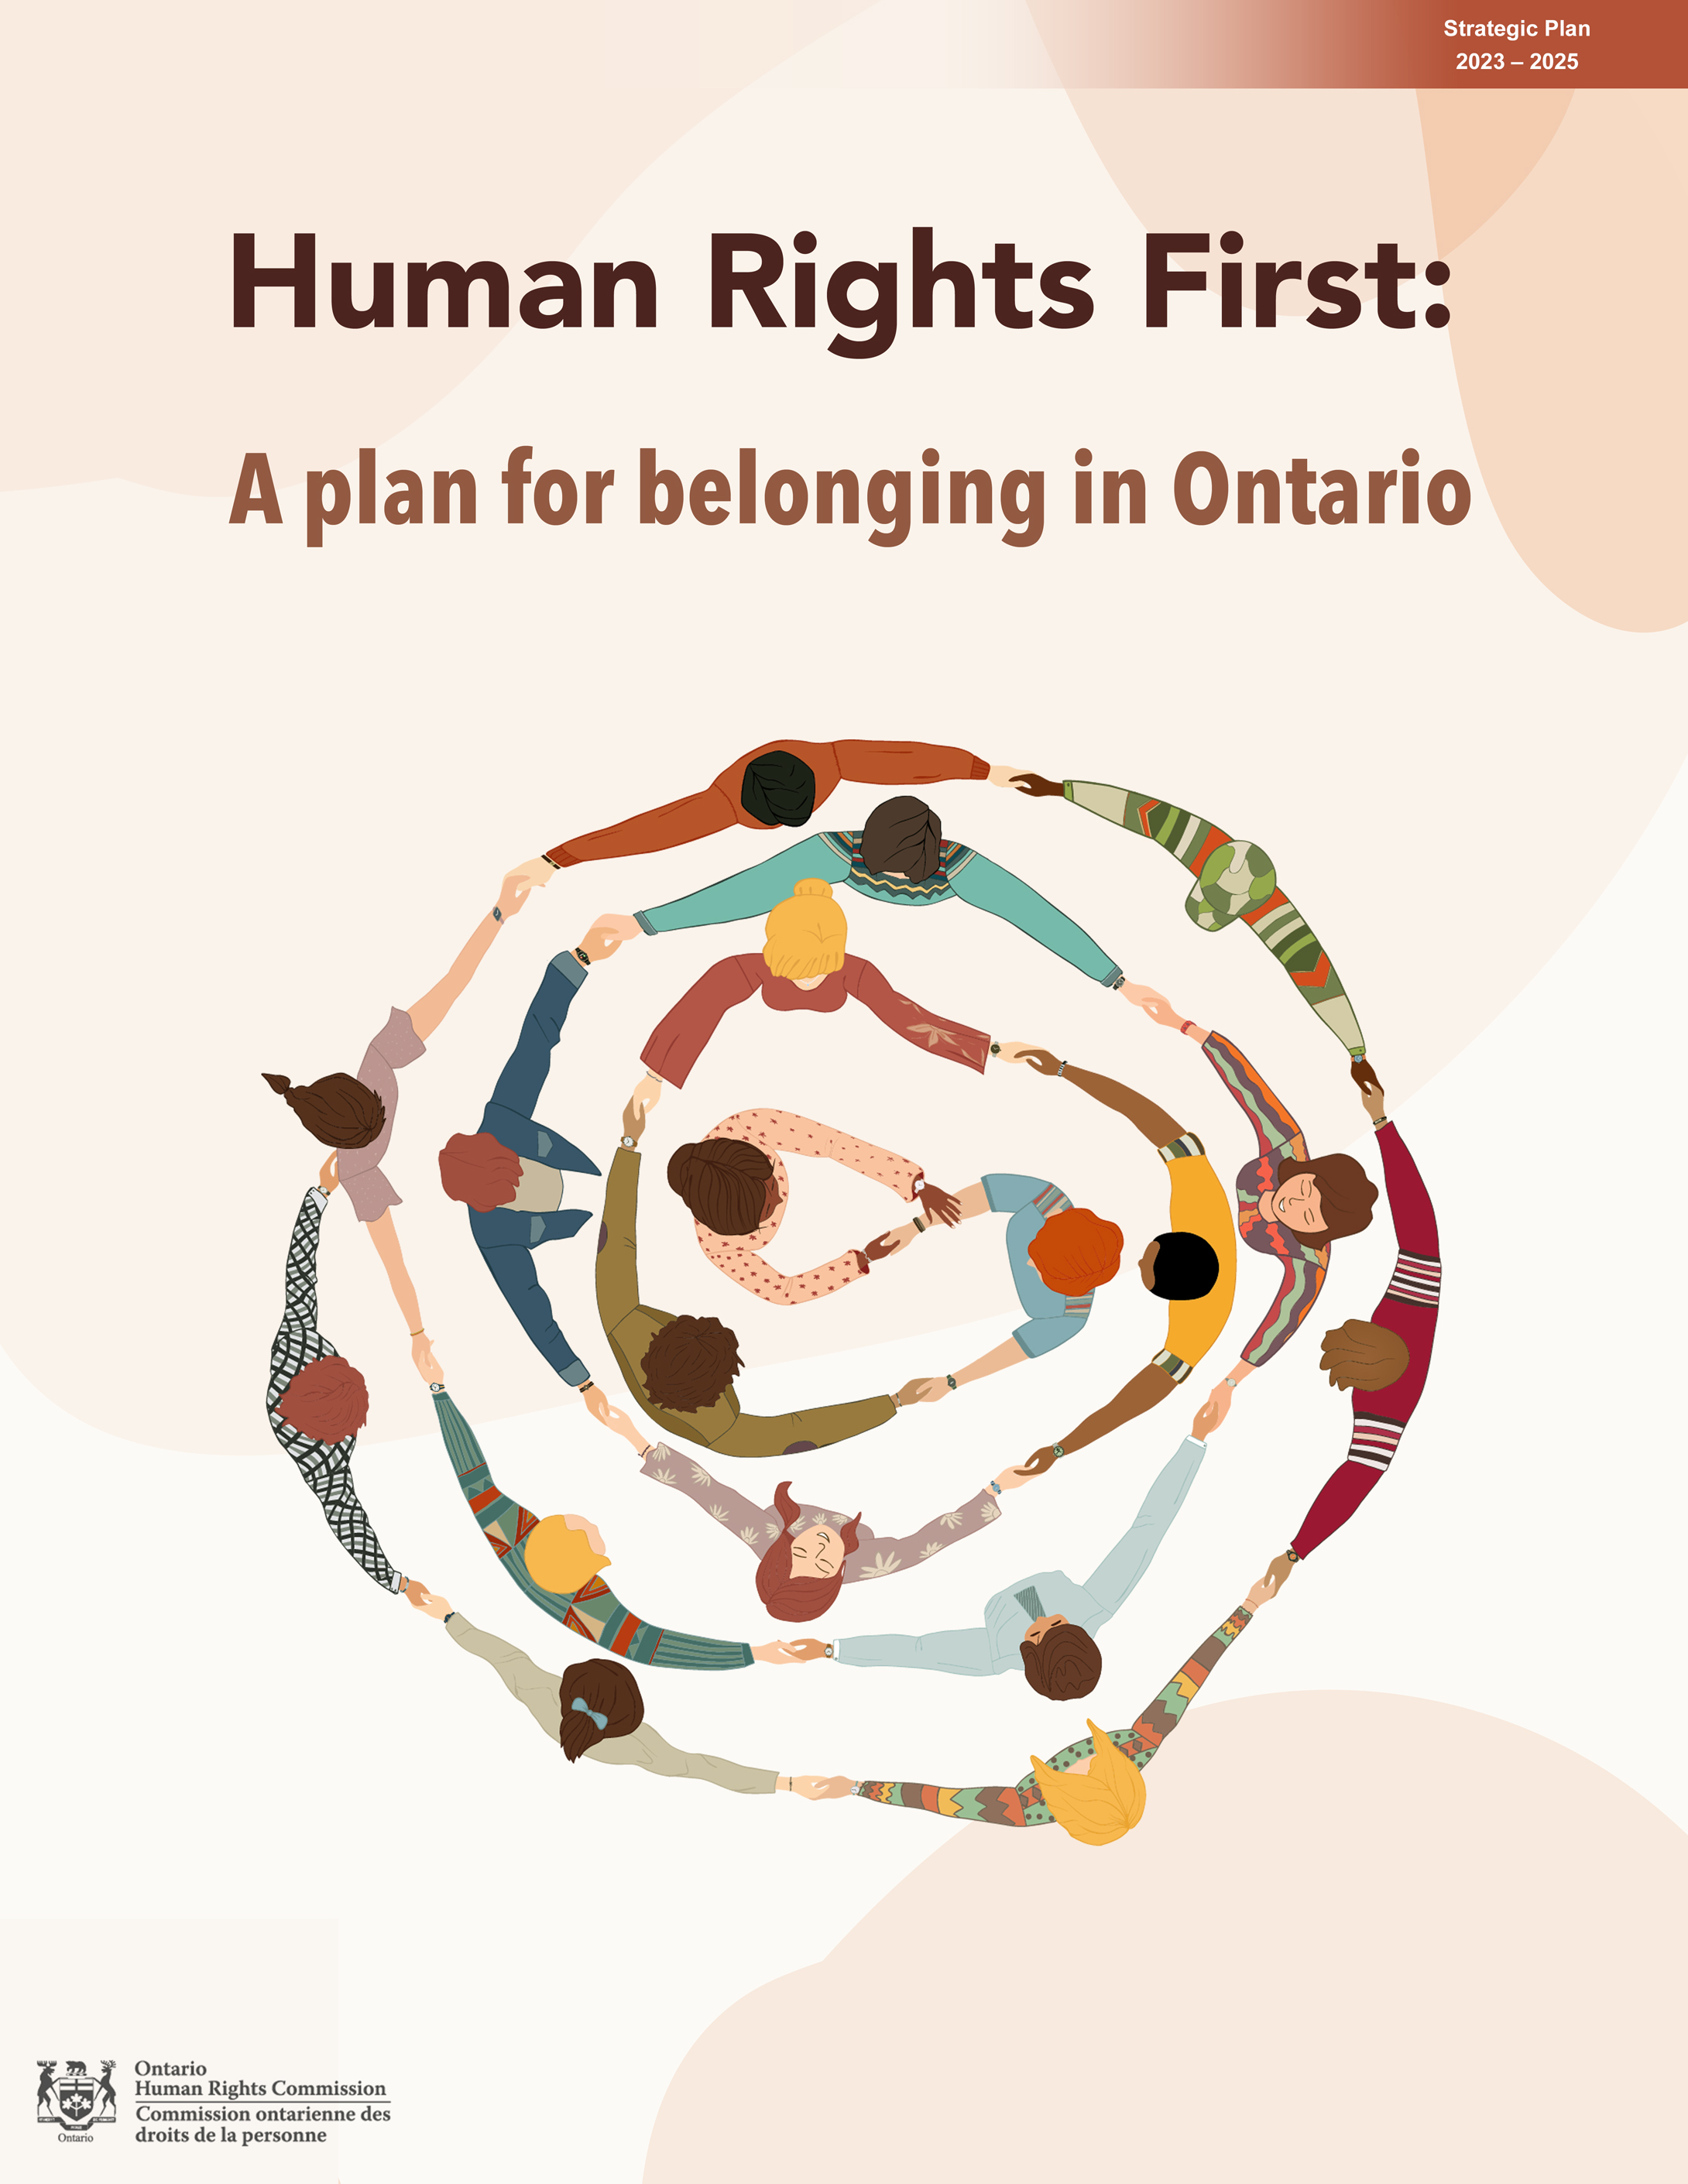 Spiral of diverse people holding hands with title "Human Rights First: A plan for belonging in Ontario"